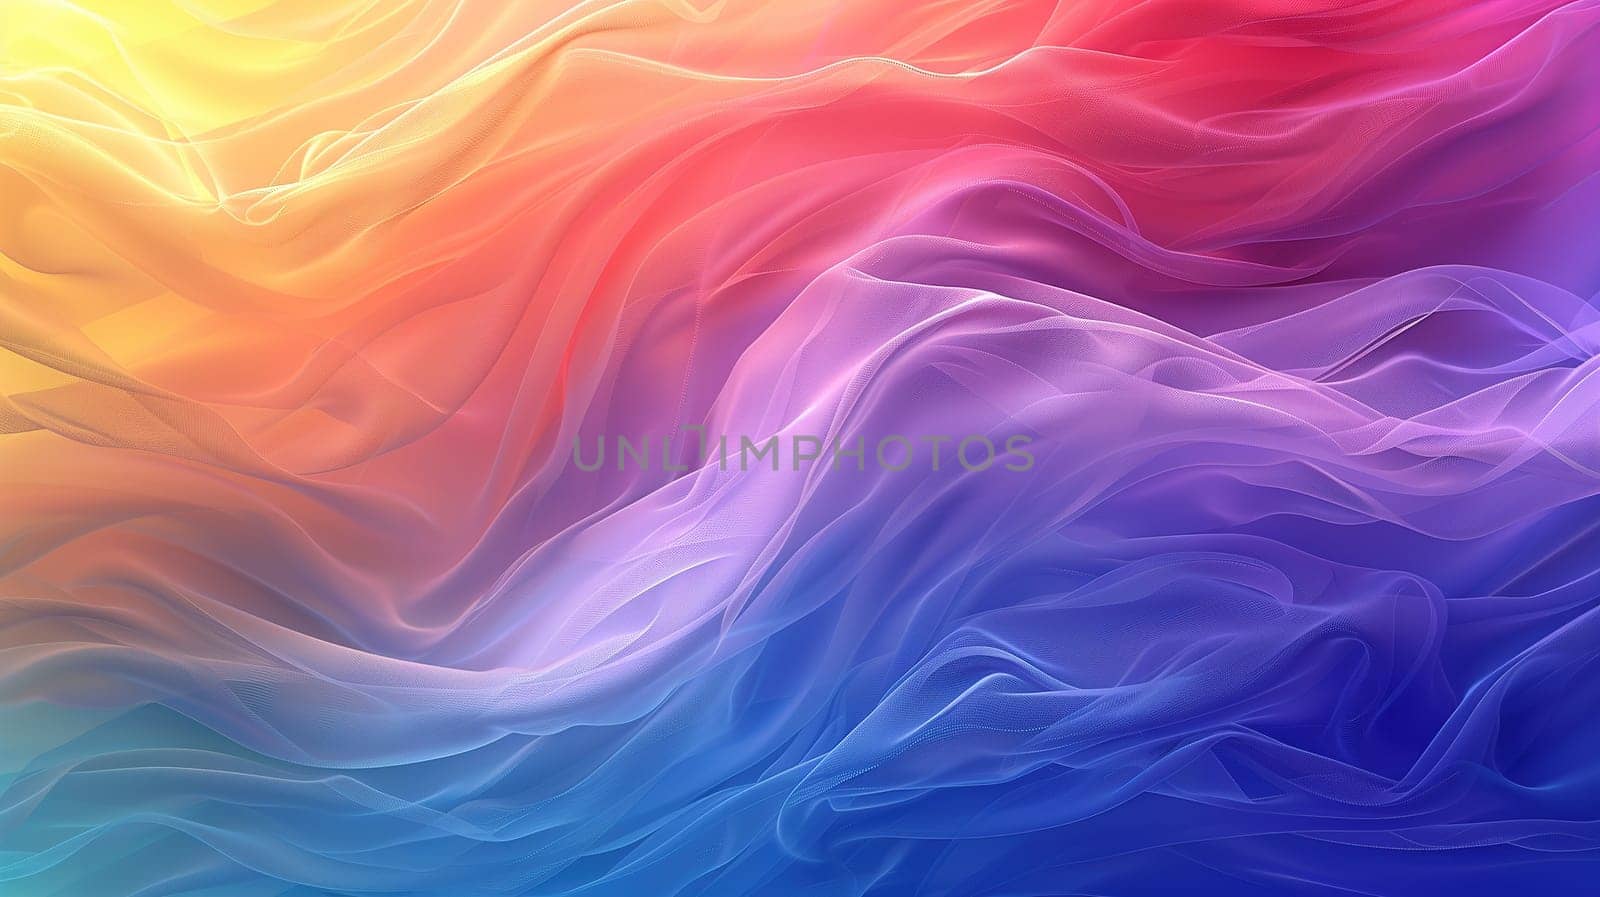 A dynamic multicolored background featuring vibrant wavy lines in various hues, creating a lively and spirited visual display reminiscent of the LGBT pride concept.